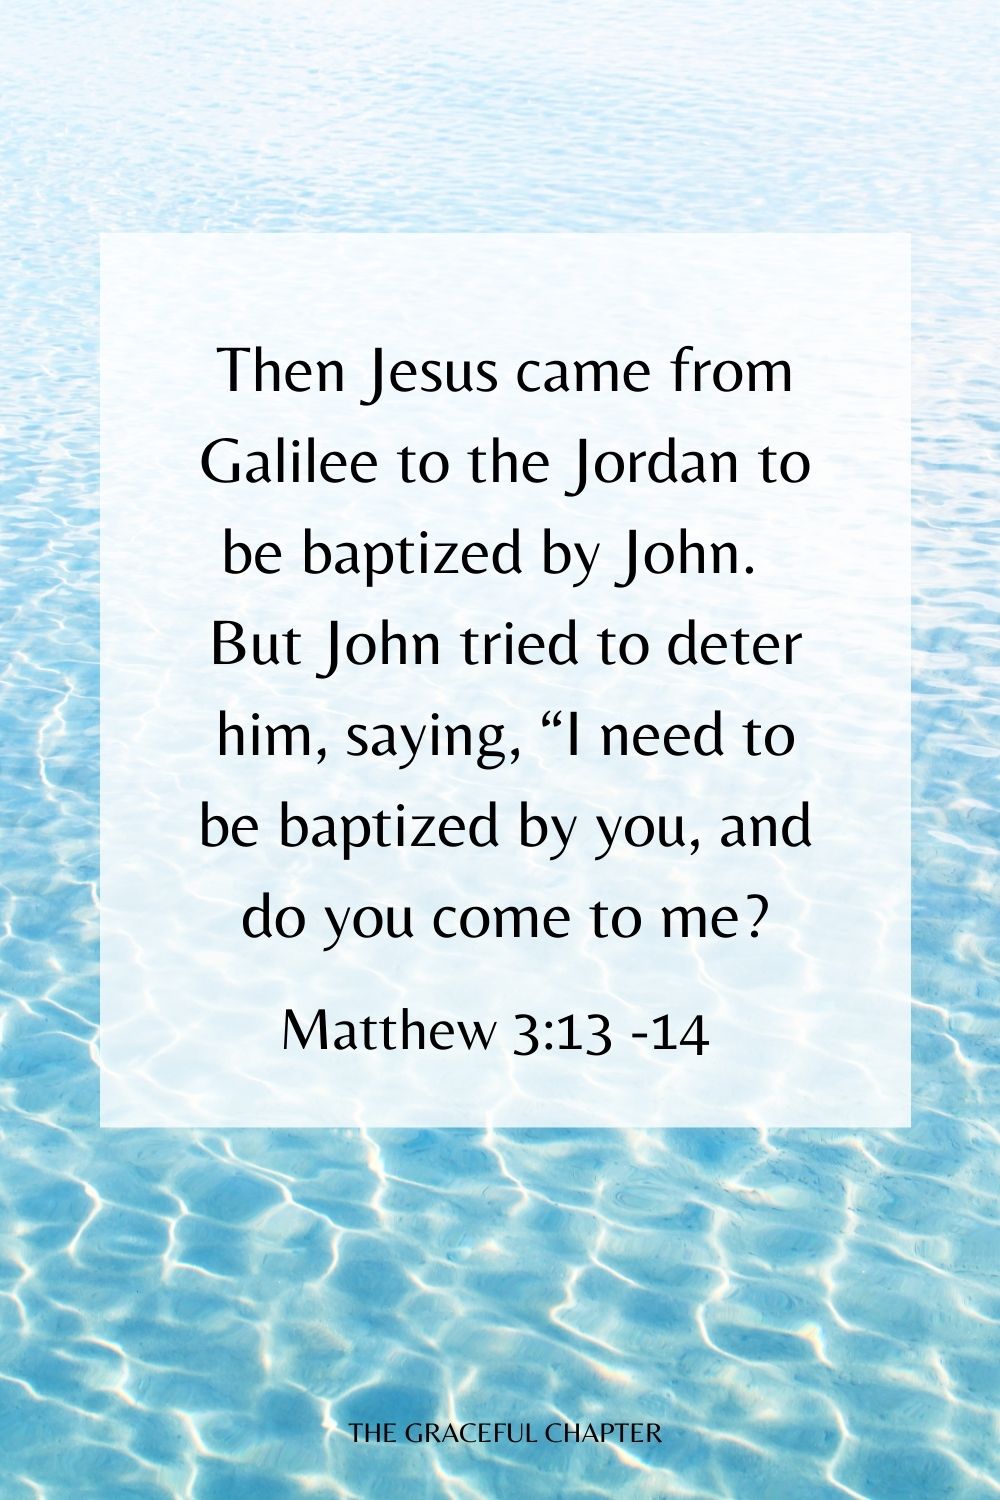 Then Jesus came from Galilee to the Jordan to be baptized by John.  But John tried to deter him, saying, “I need to be baptized by you, and do you come to me? Matthew 3:13 -14